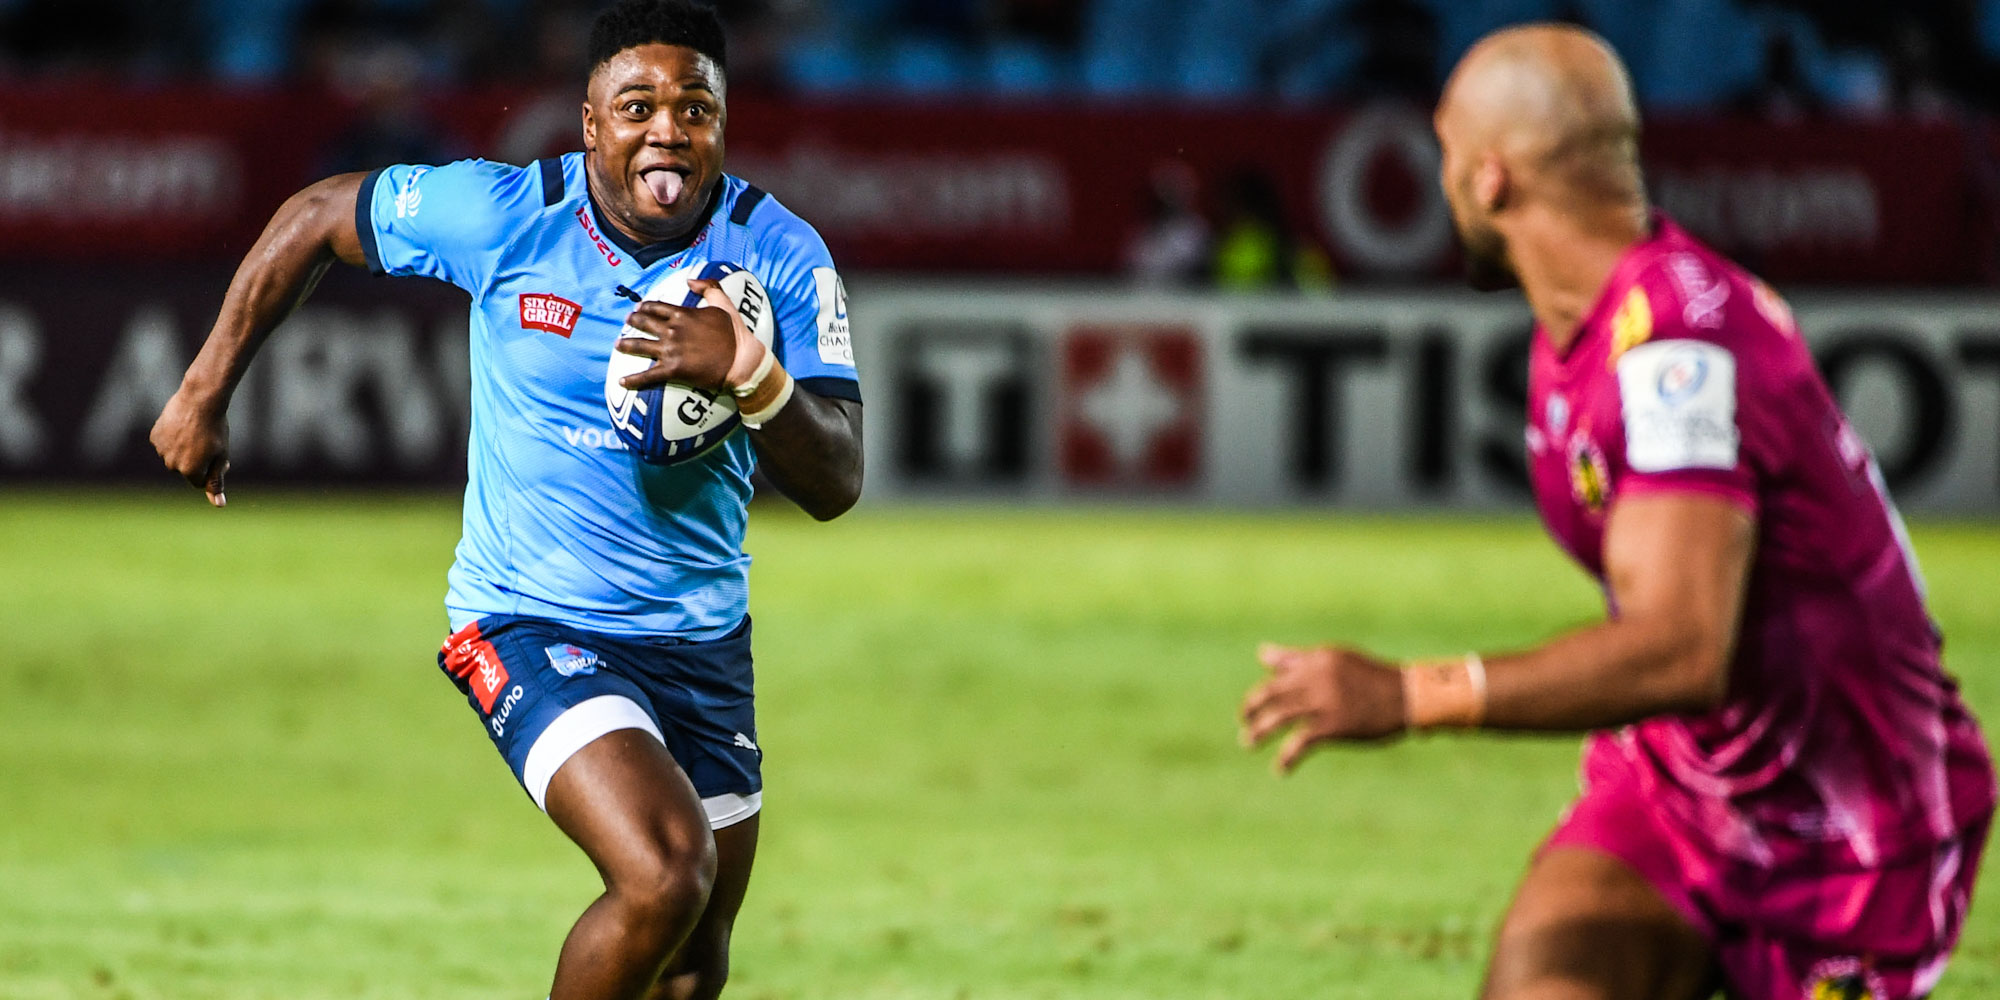 Wandisile Simelane scored twice as the Vodacom Bulls beat the Exeter Chiefs in Pretoria.